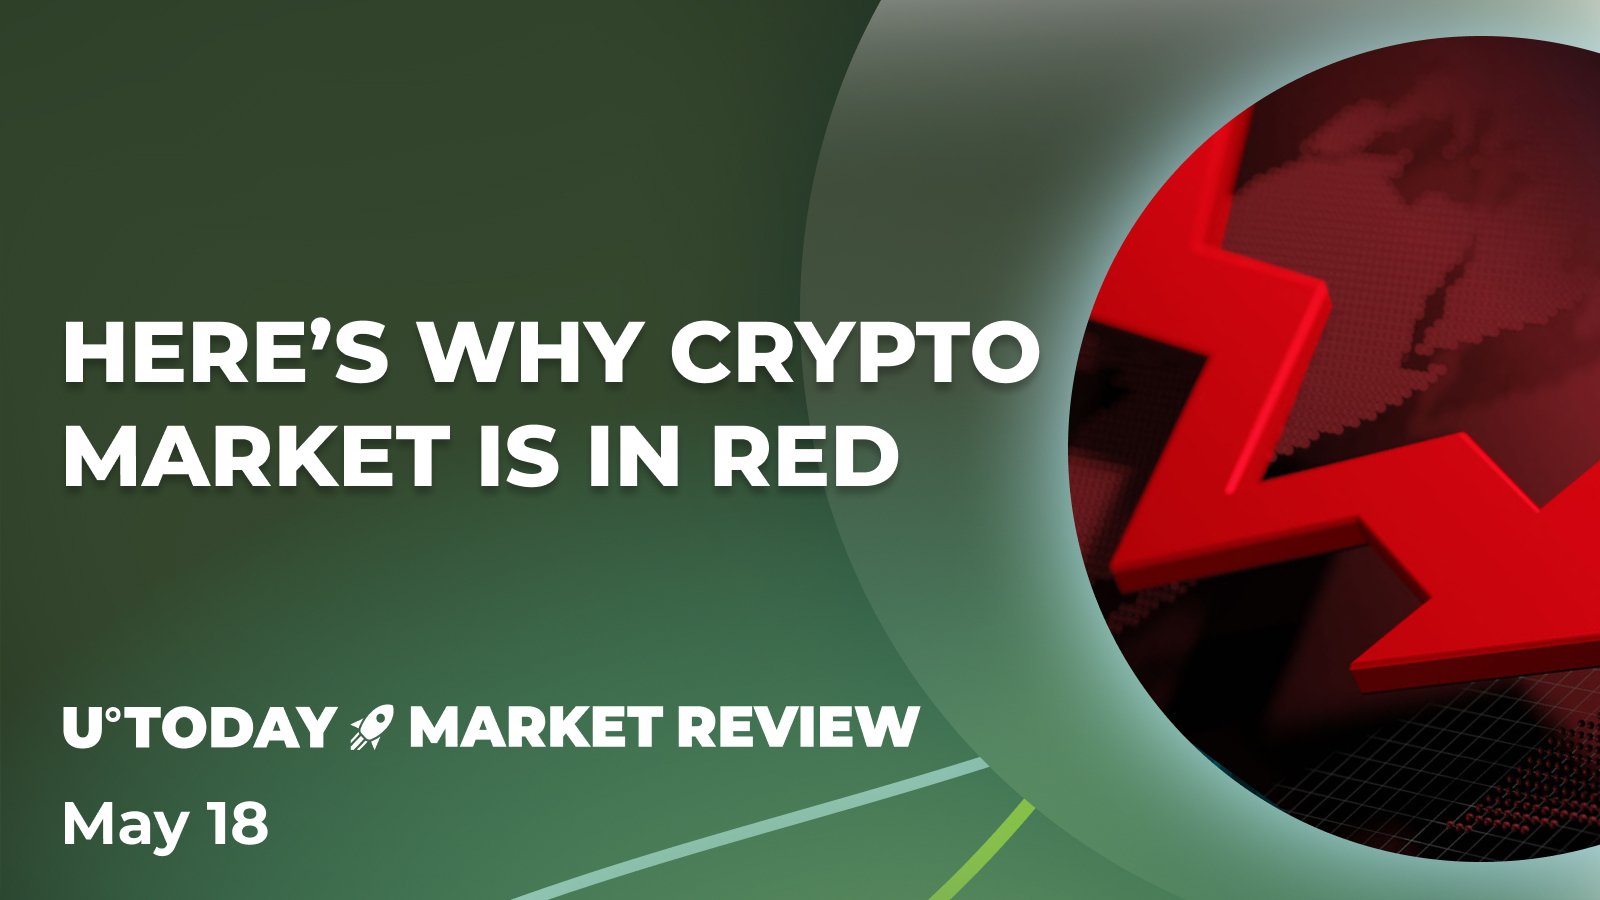 Here's Why Crypto Market Is in Red